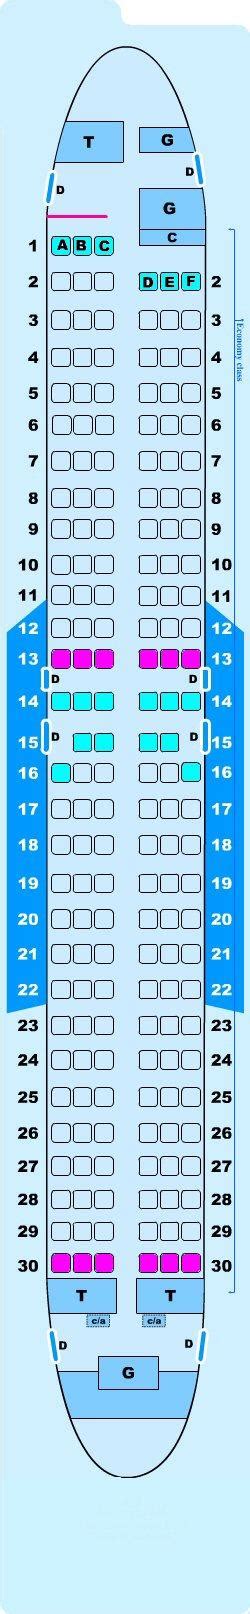 B737 800 seat map. Seatlink's take. Our picks: 2 A-B-C, 1 D-E-F, row 16. As Southwest's largest capacity plane at 175 passengers, it is also their newest, coming into service in 2012. Over 100 are in service, and when the order is complete, it will be their second-largest fleet member. 